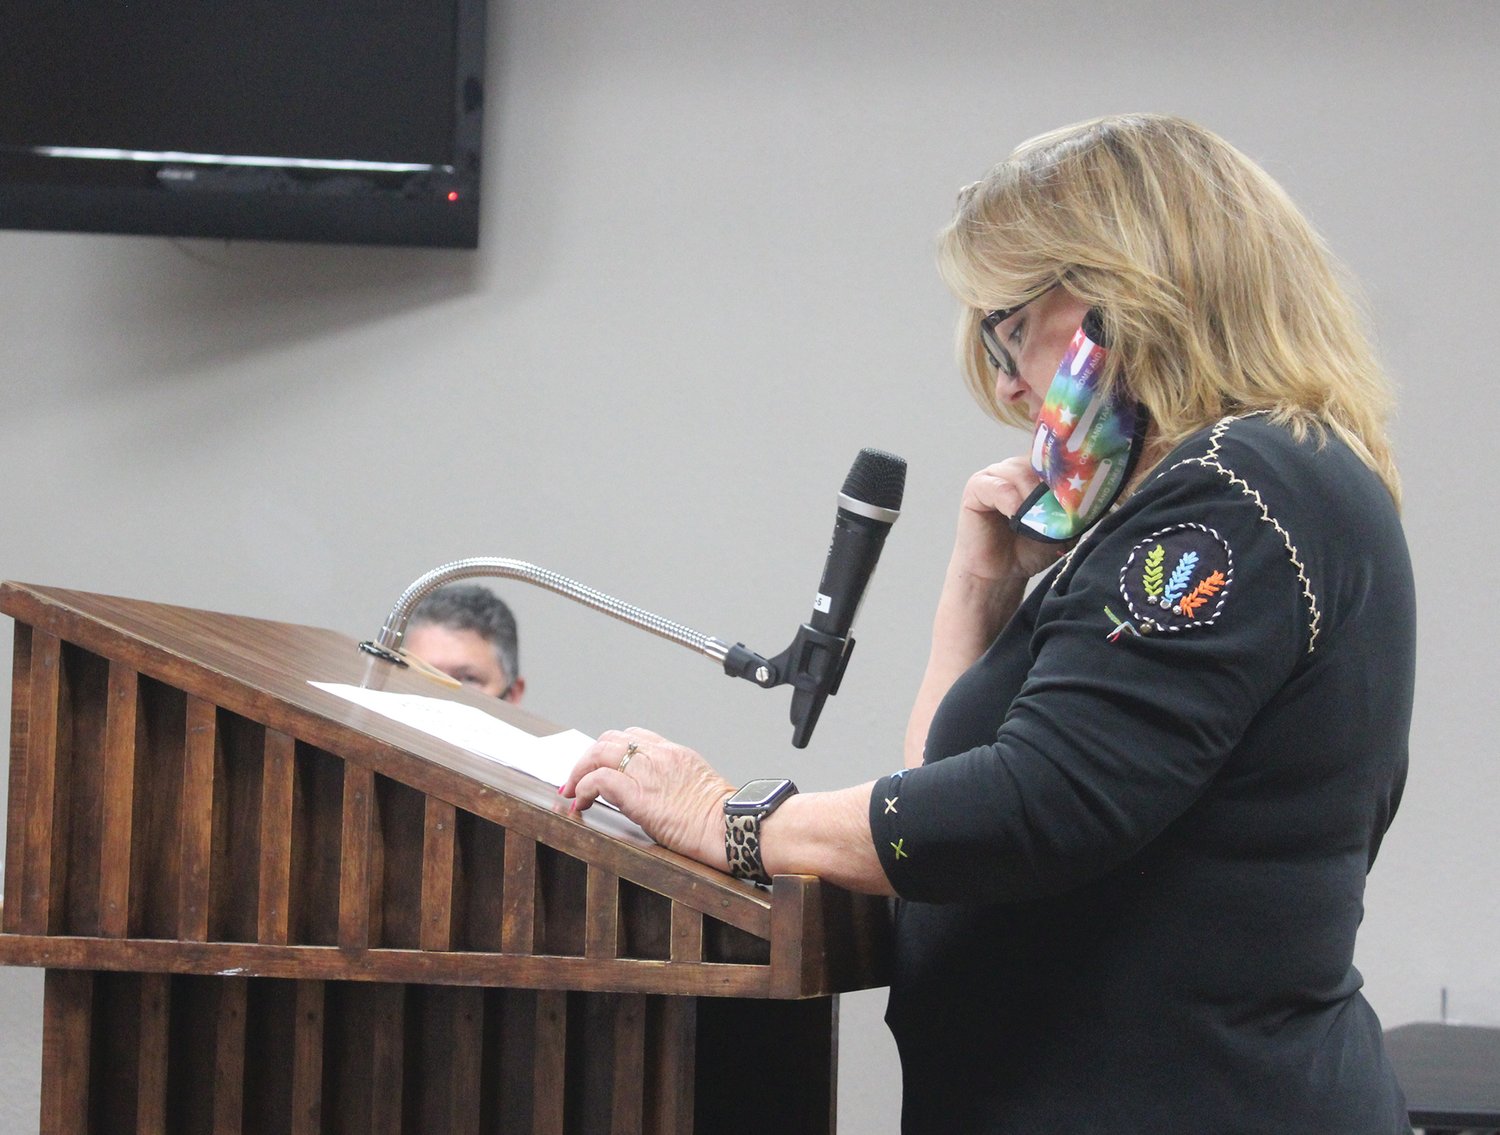 Dollery announced her last day with the city would be Friday, March 19, at the Gonzales City Council Meeting on Thursday, March 11.